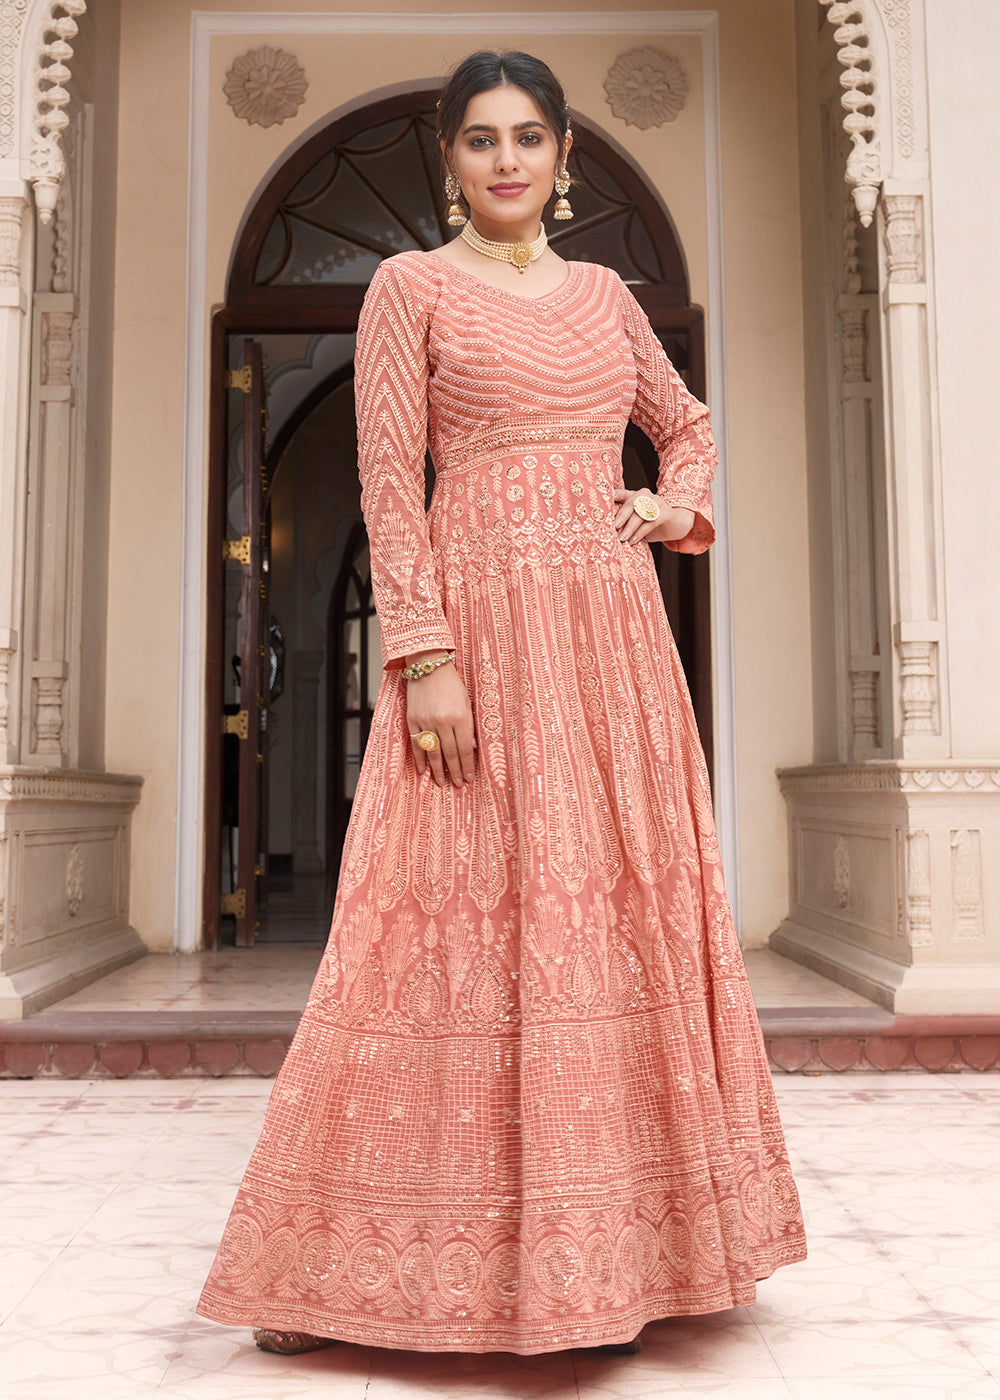 Buy Now Embroidered Pretty Peach Function Wear Anarkali Gown Online in USA, UK, Australia, New Zealand, Canada, Italy & Worldwide at Empress Clothing. 